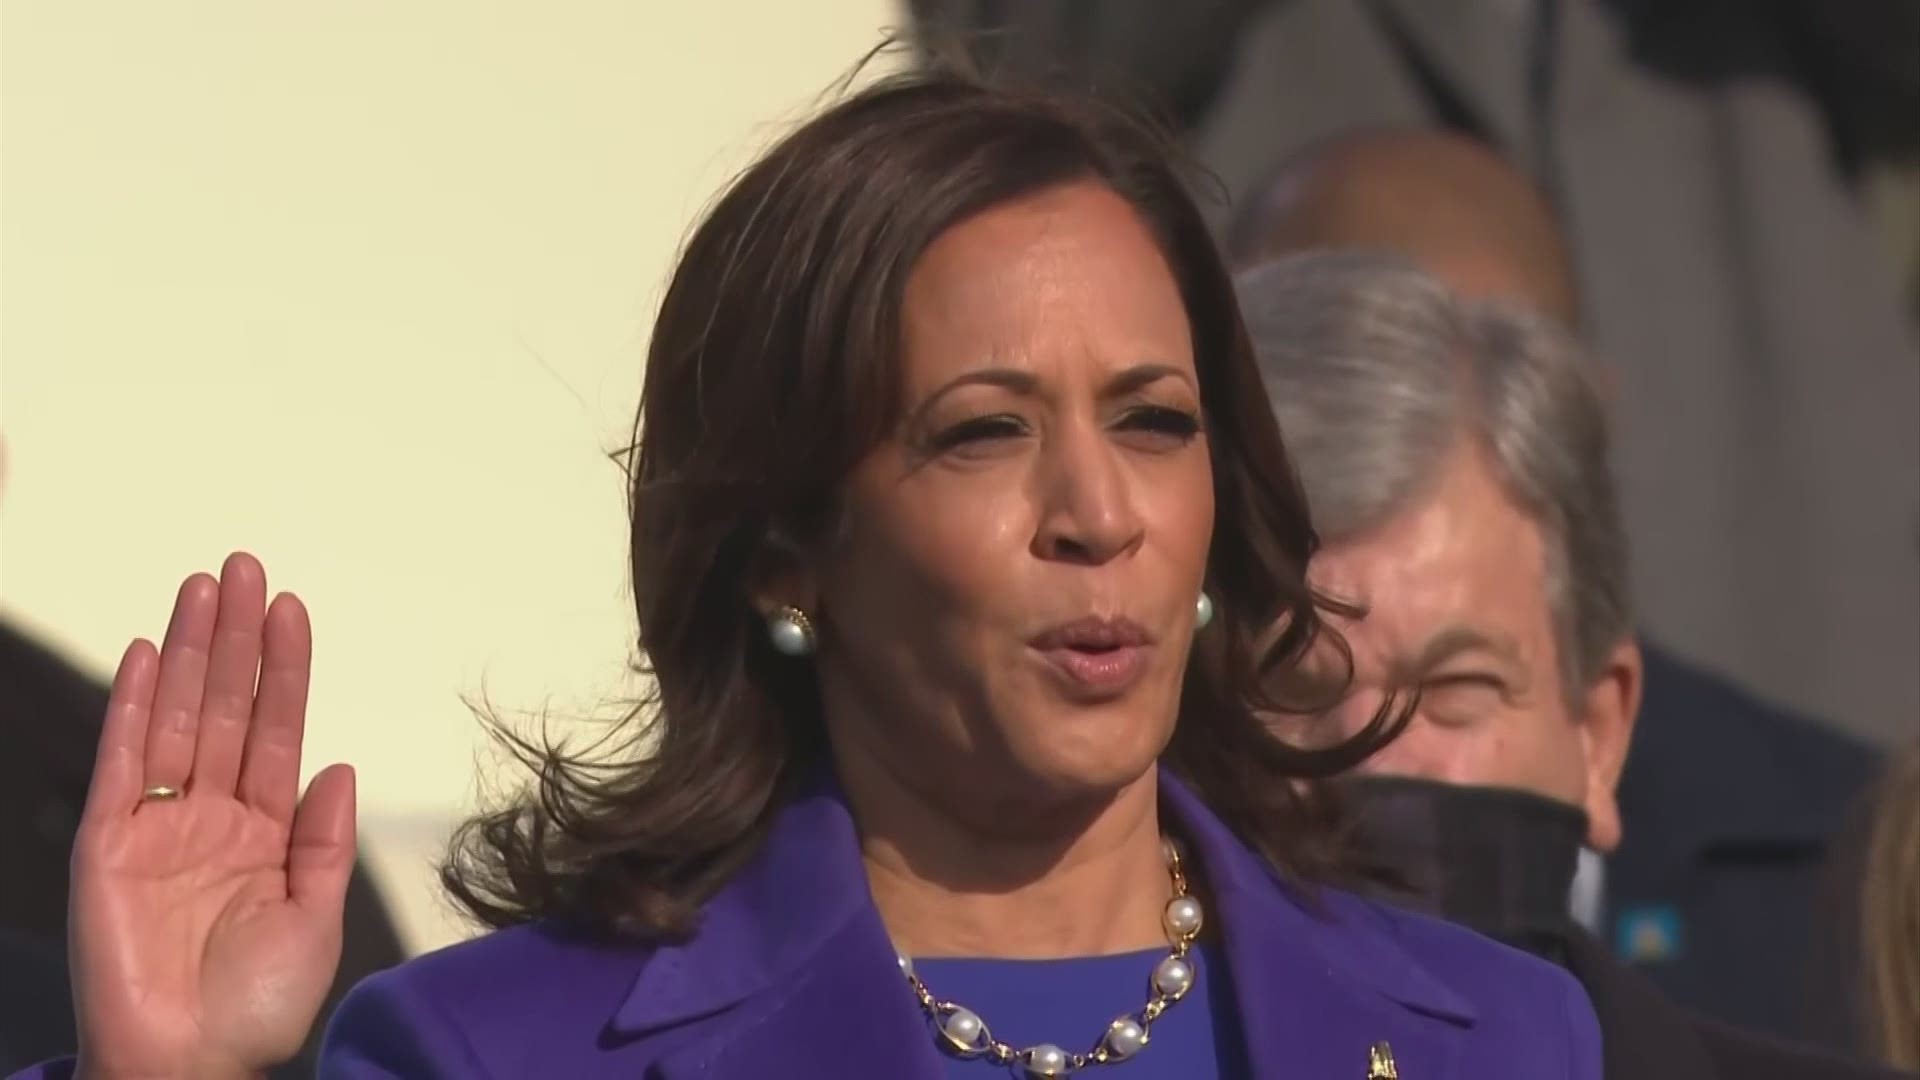 History was made when Kamala Harris was sworn in as Vice President of the United States.